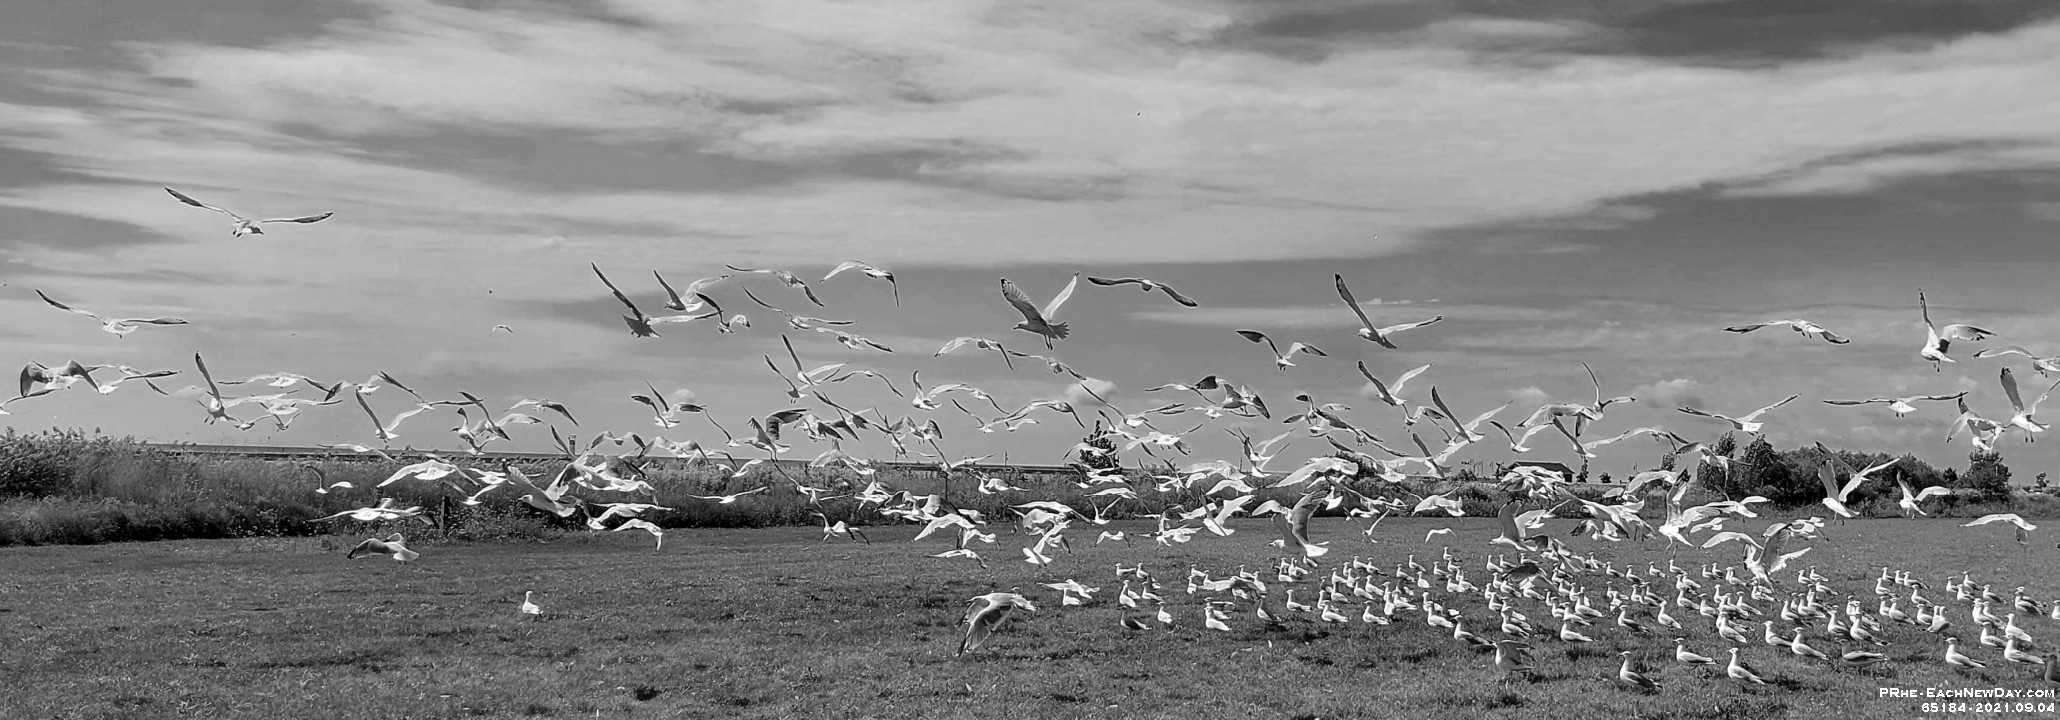 65184RoCrBw - Chasing Seagulls in Port Stanley on the way home from Larry - Susan's